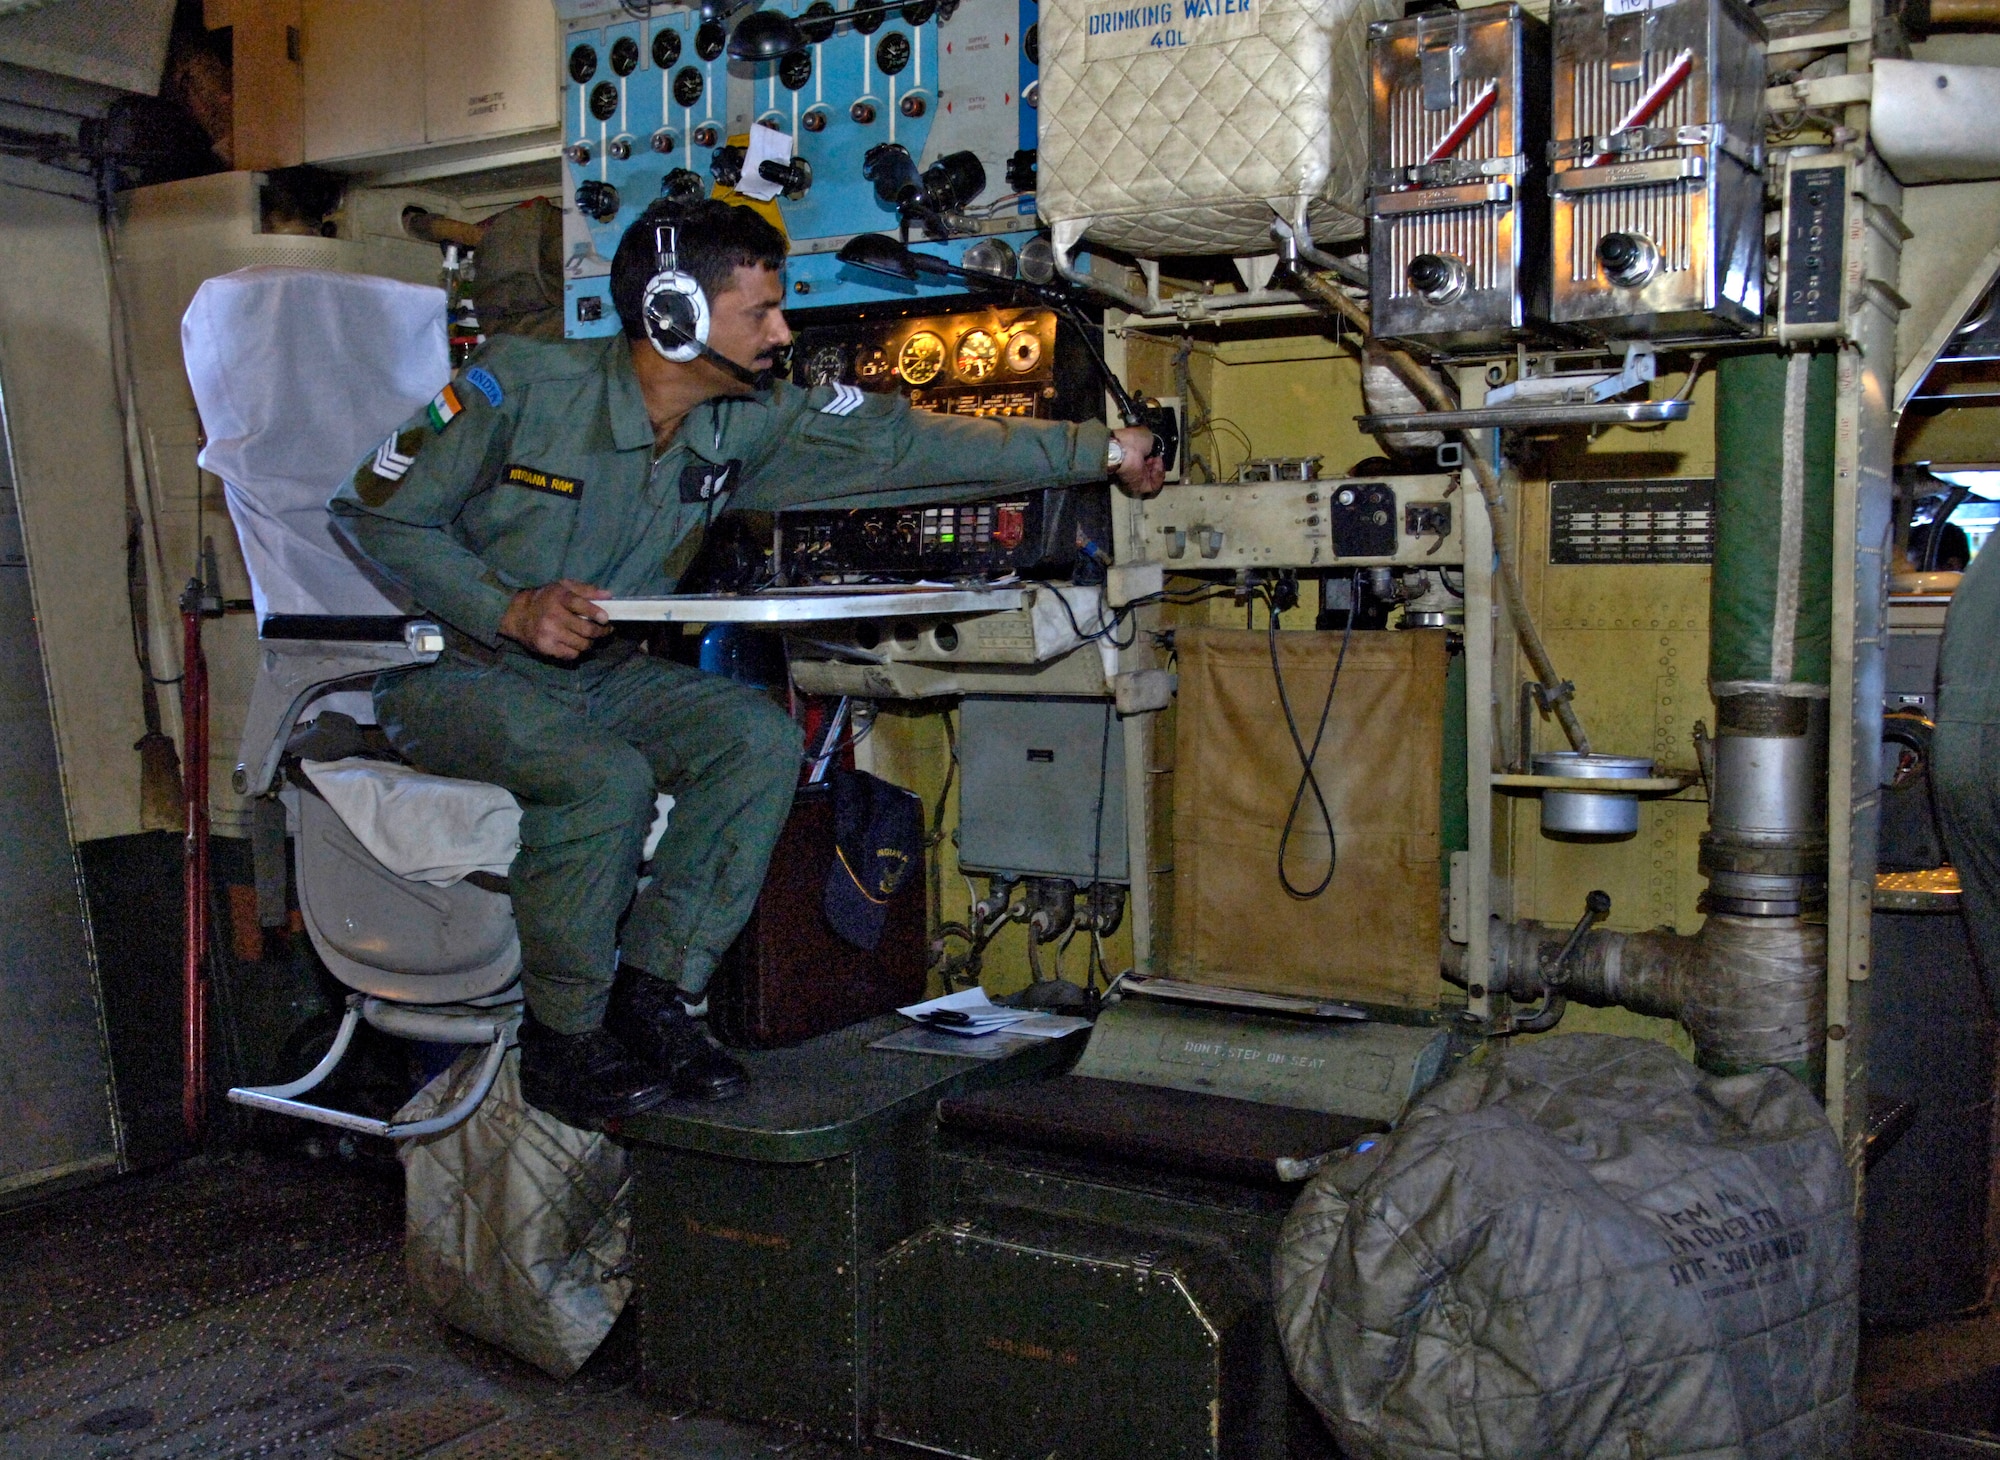 Sgt. Nirana Ram adjusts controls at his aircrew station on an IL-76 medium cargo jet during a training mission over the big island of Hawaii Sept. 20, 2006. Sgt Ram is a flight gunner with the Indian Air Force. The Indian Air Force is flying members of the 15th Airlift Wing to show their American counter parts what their aircraft is capable of. (U.S. Air Force photo/ Tech. Sgt. Shane A. Cuomo)
